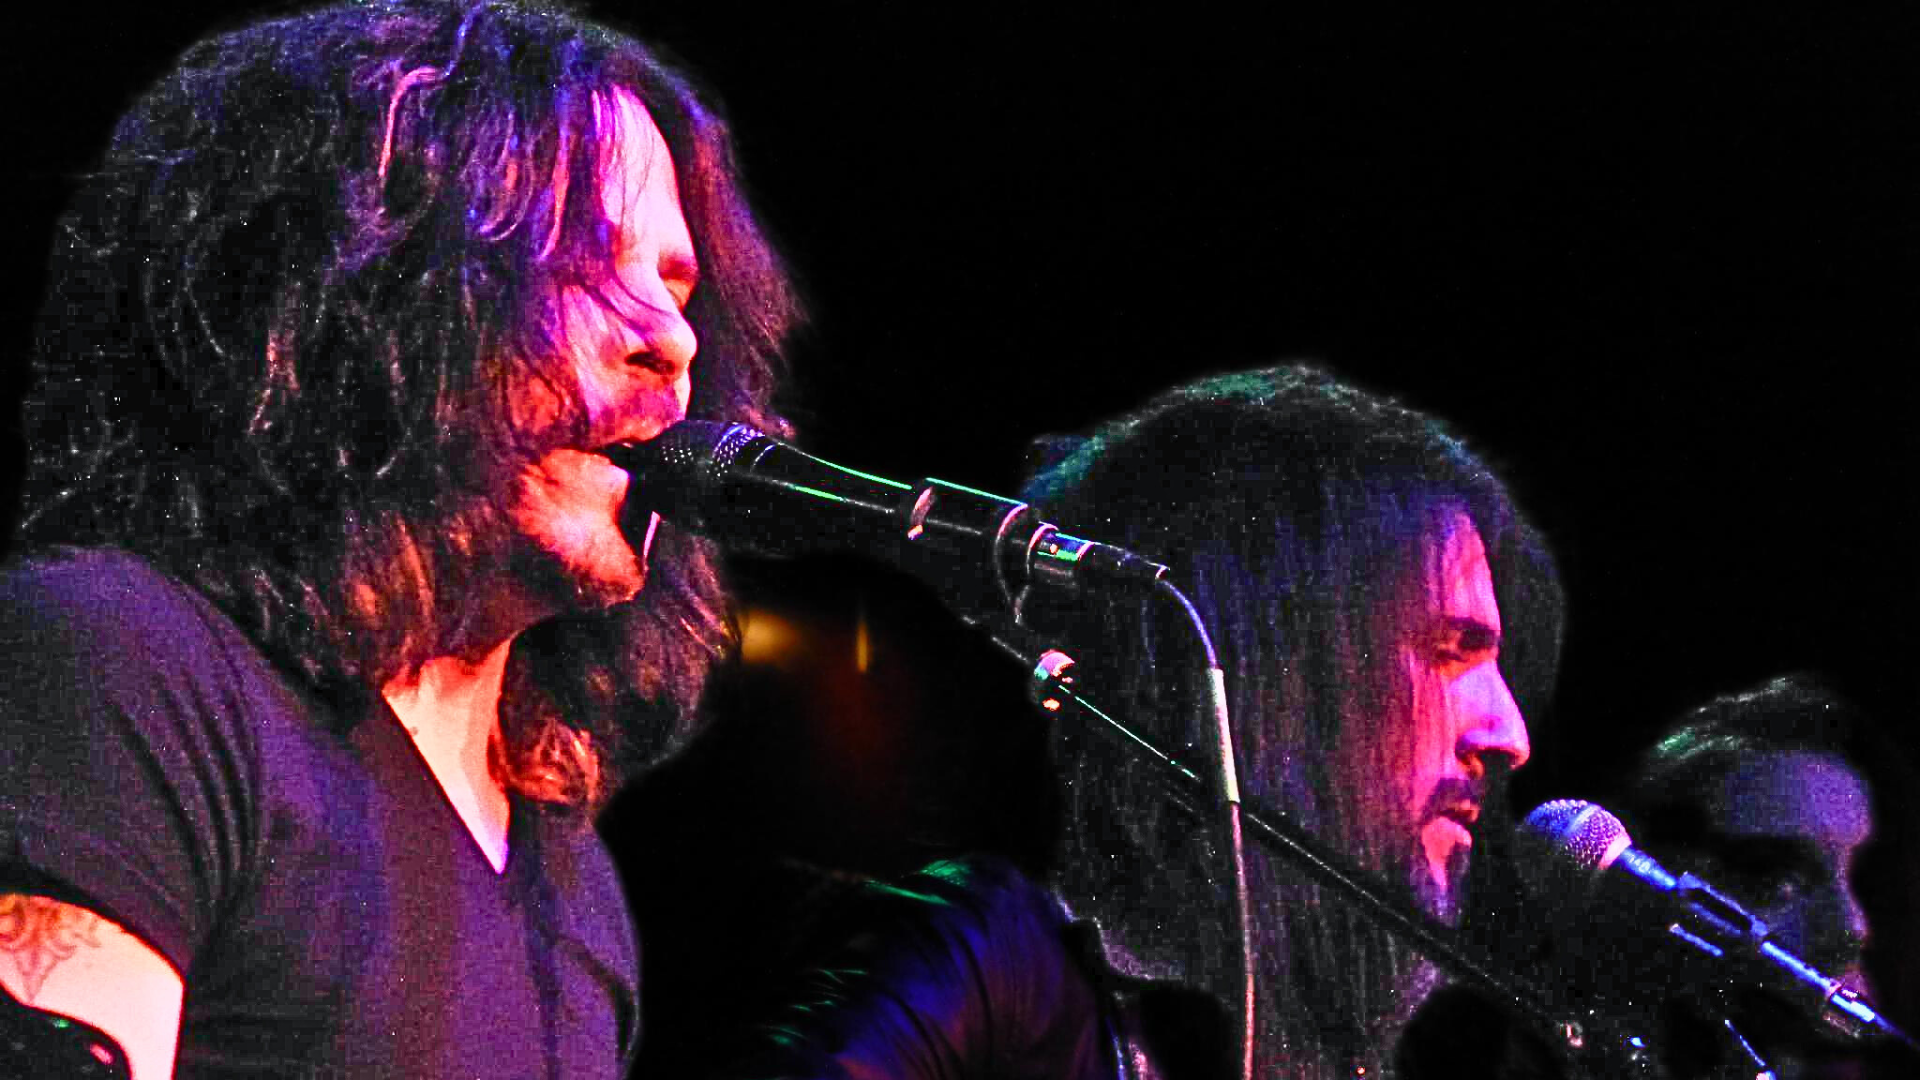 Archive – Gig review: Tony Harnell and Wildflowers featuring Bumblefoot at The Cutting Room, New York City (2013)